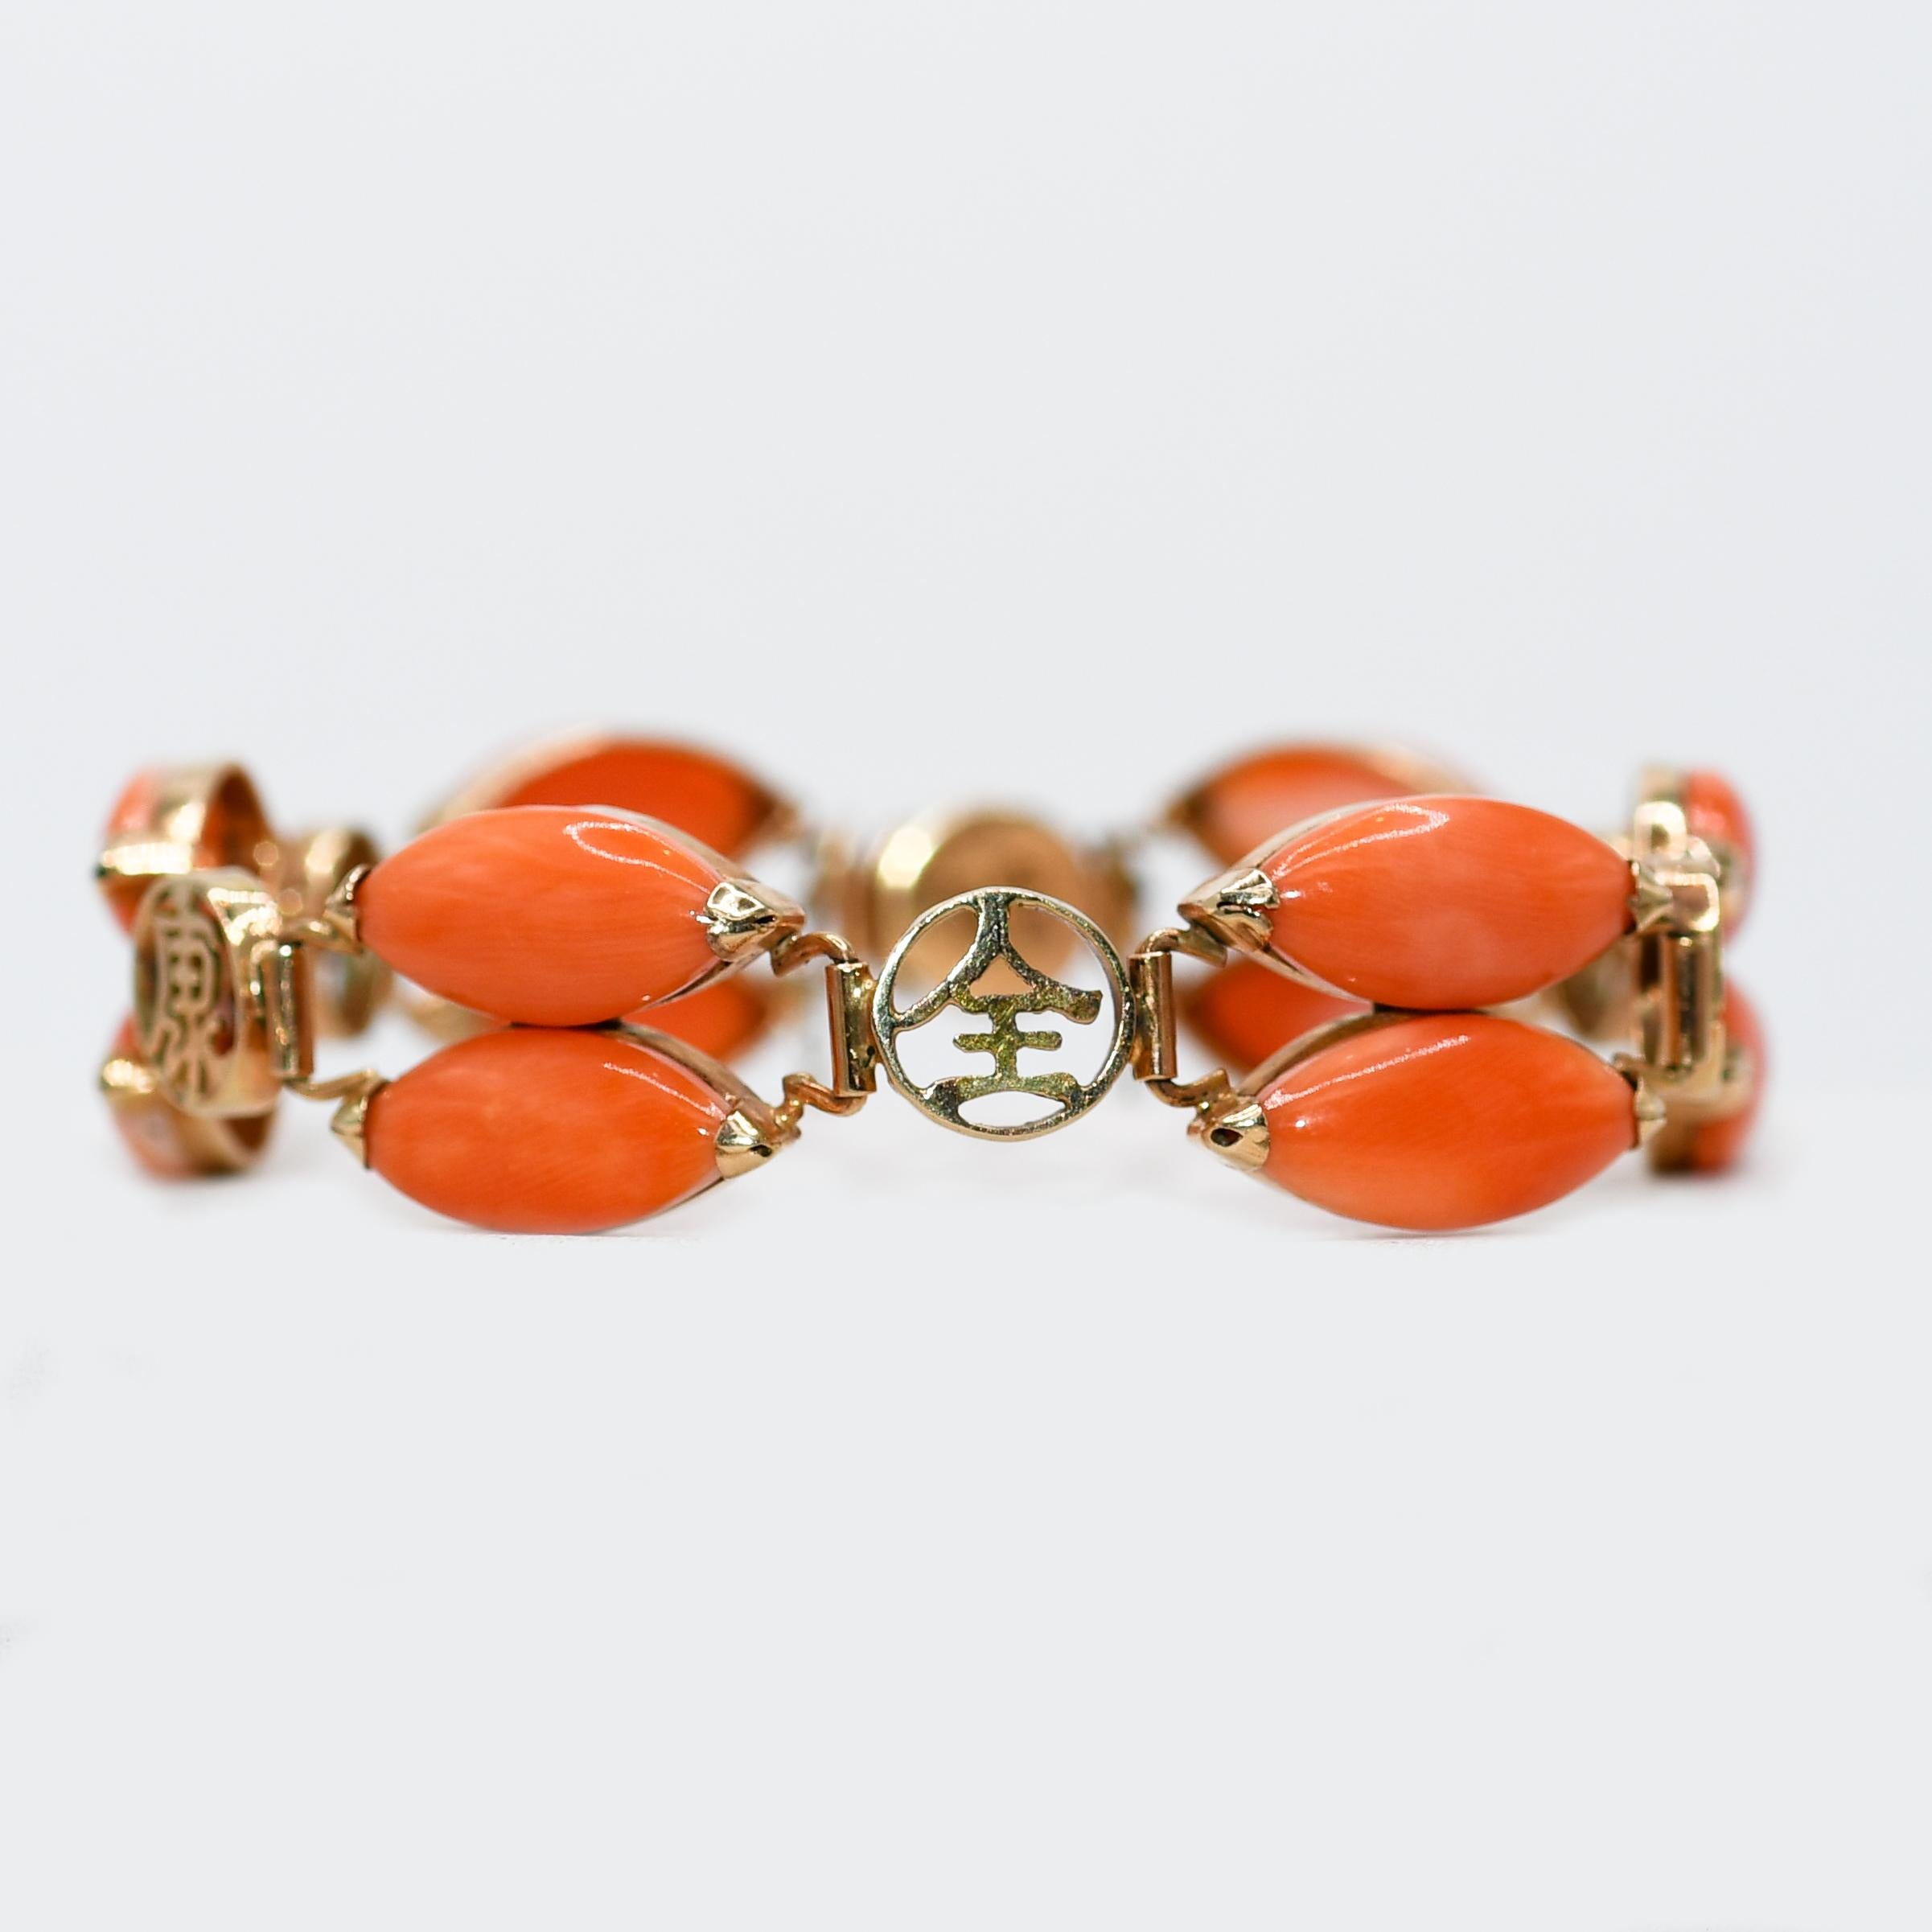 Ladies vintage 14k yellow gold and pink coral bracelet.
Stamped 14k and weighs 16 grams gross weight.
Approximately 10 grams of 14k gold.
The coral is a pinkish-orange color, marquise shaped stones set in a heavy duty gold setting.
The bracelet